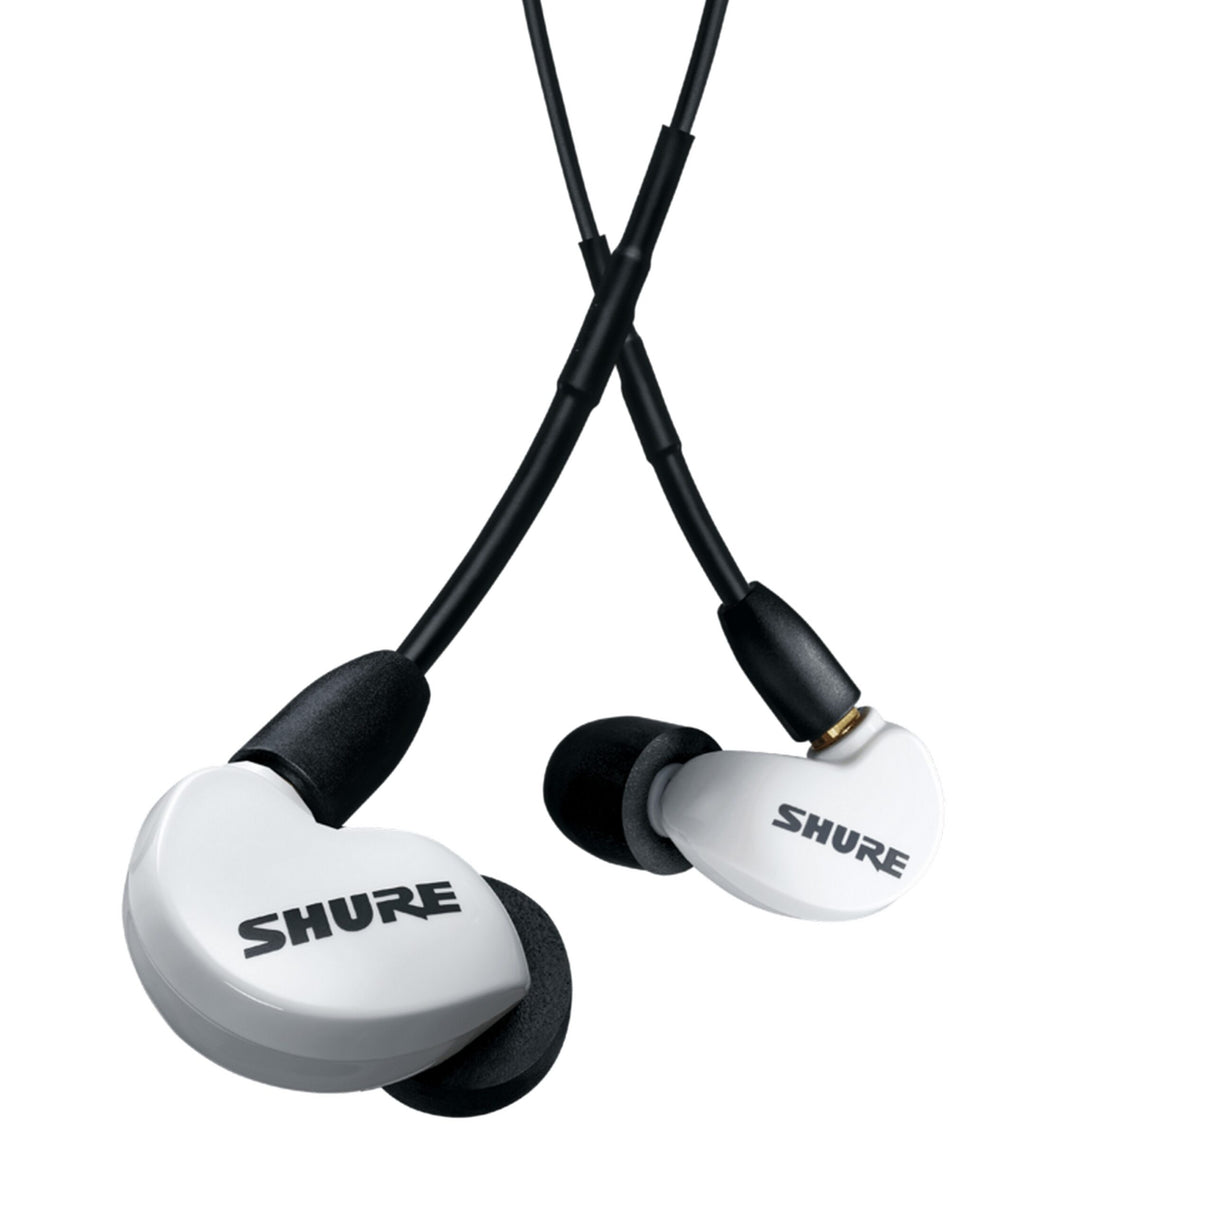 Shure AONIC 215 SE215DYWH+UNI Wired Sound Isolating In-Ear Headphone, White